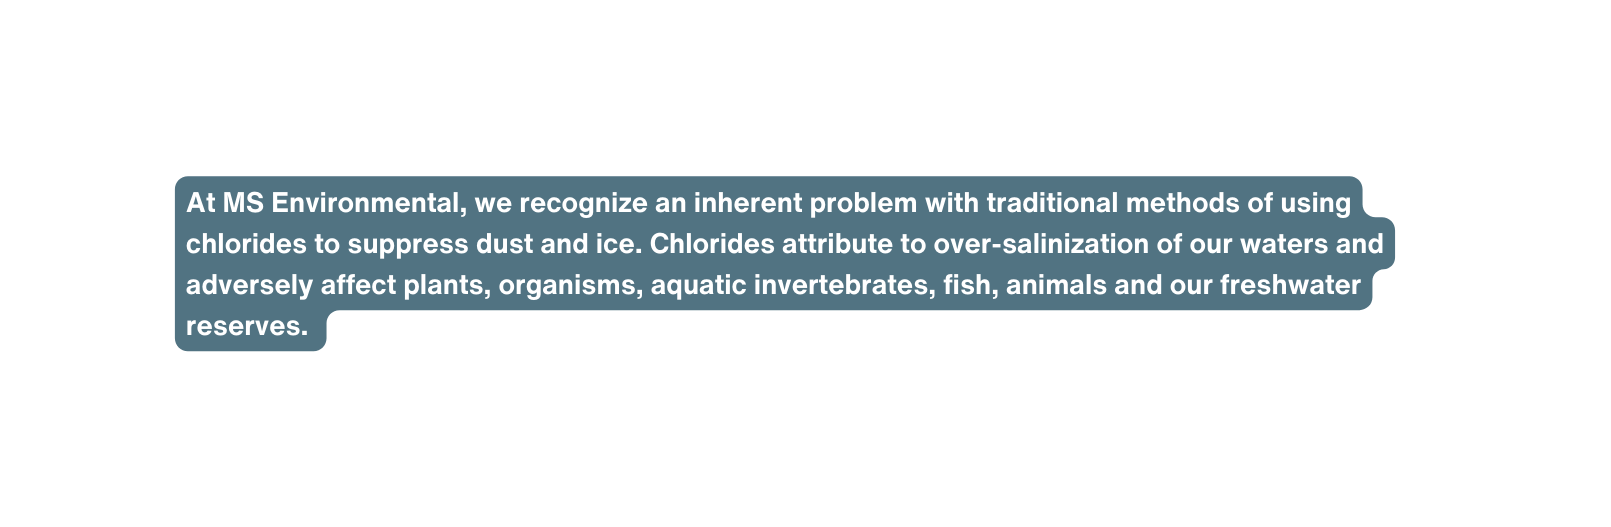 At MS Environmental we recognize an inherent problem with traditional methods of using chlorides to suppress dust and ice Chlorides attribute to over salinization of our waters and adversely affect plants organisms aquatic invertebrates fish animals and our freshwater reserves